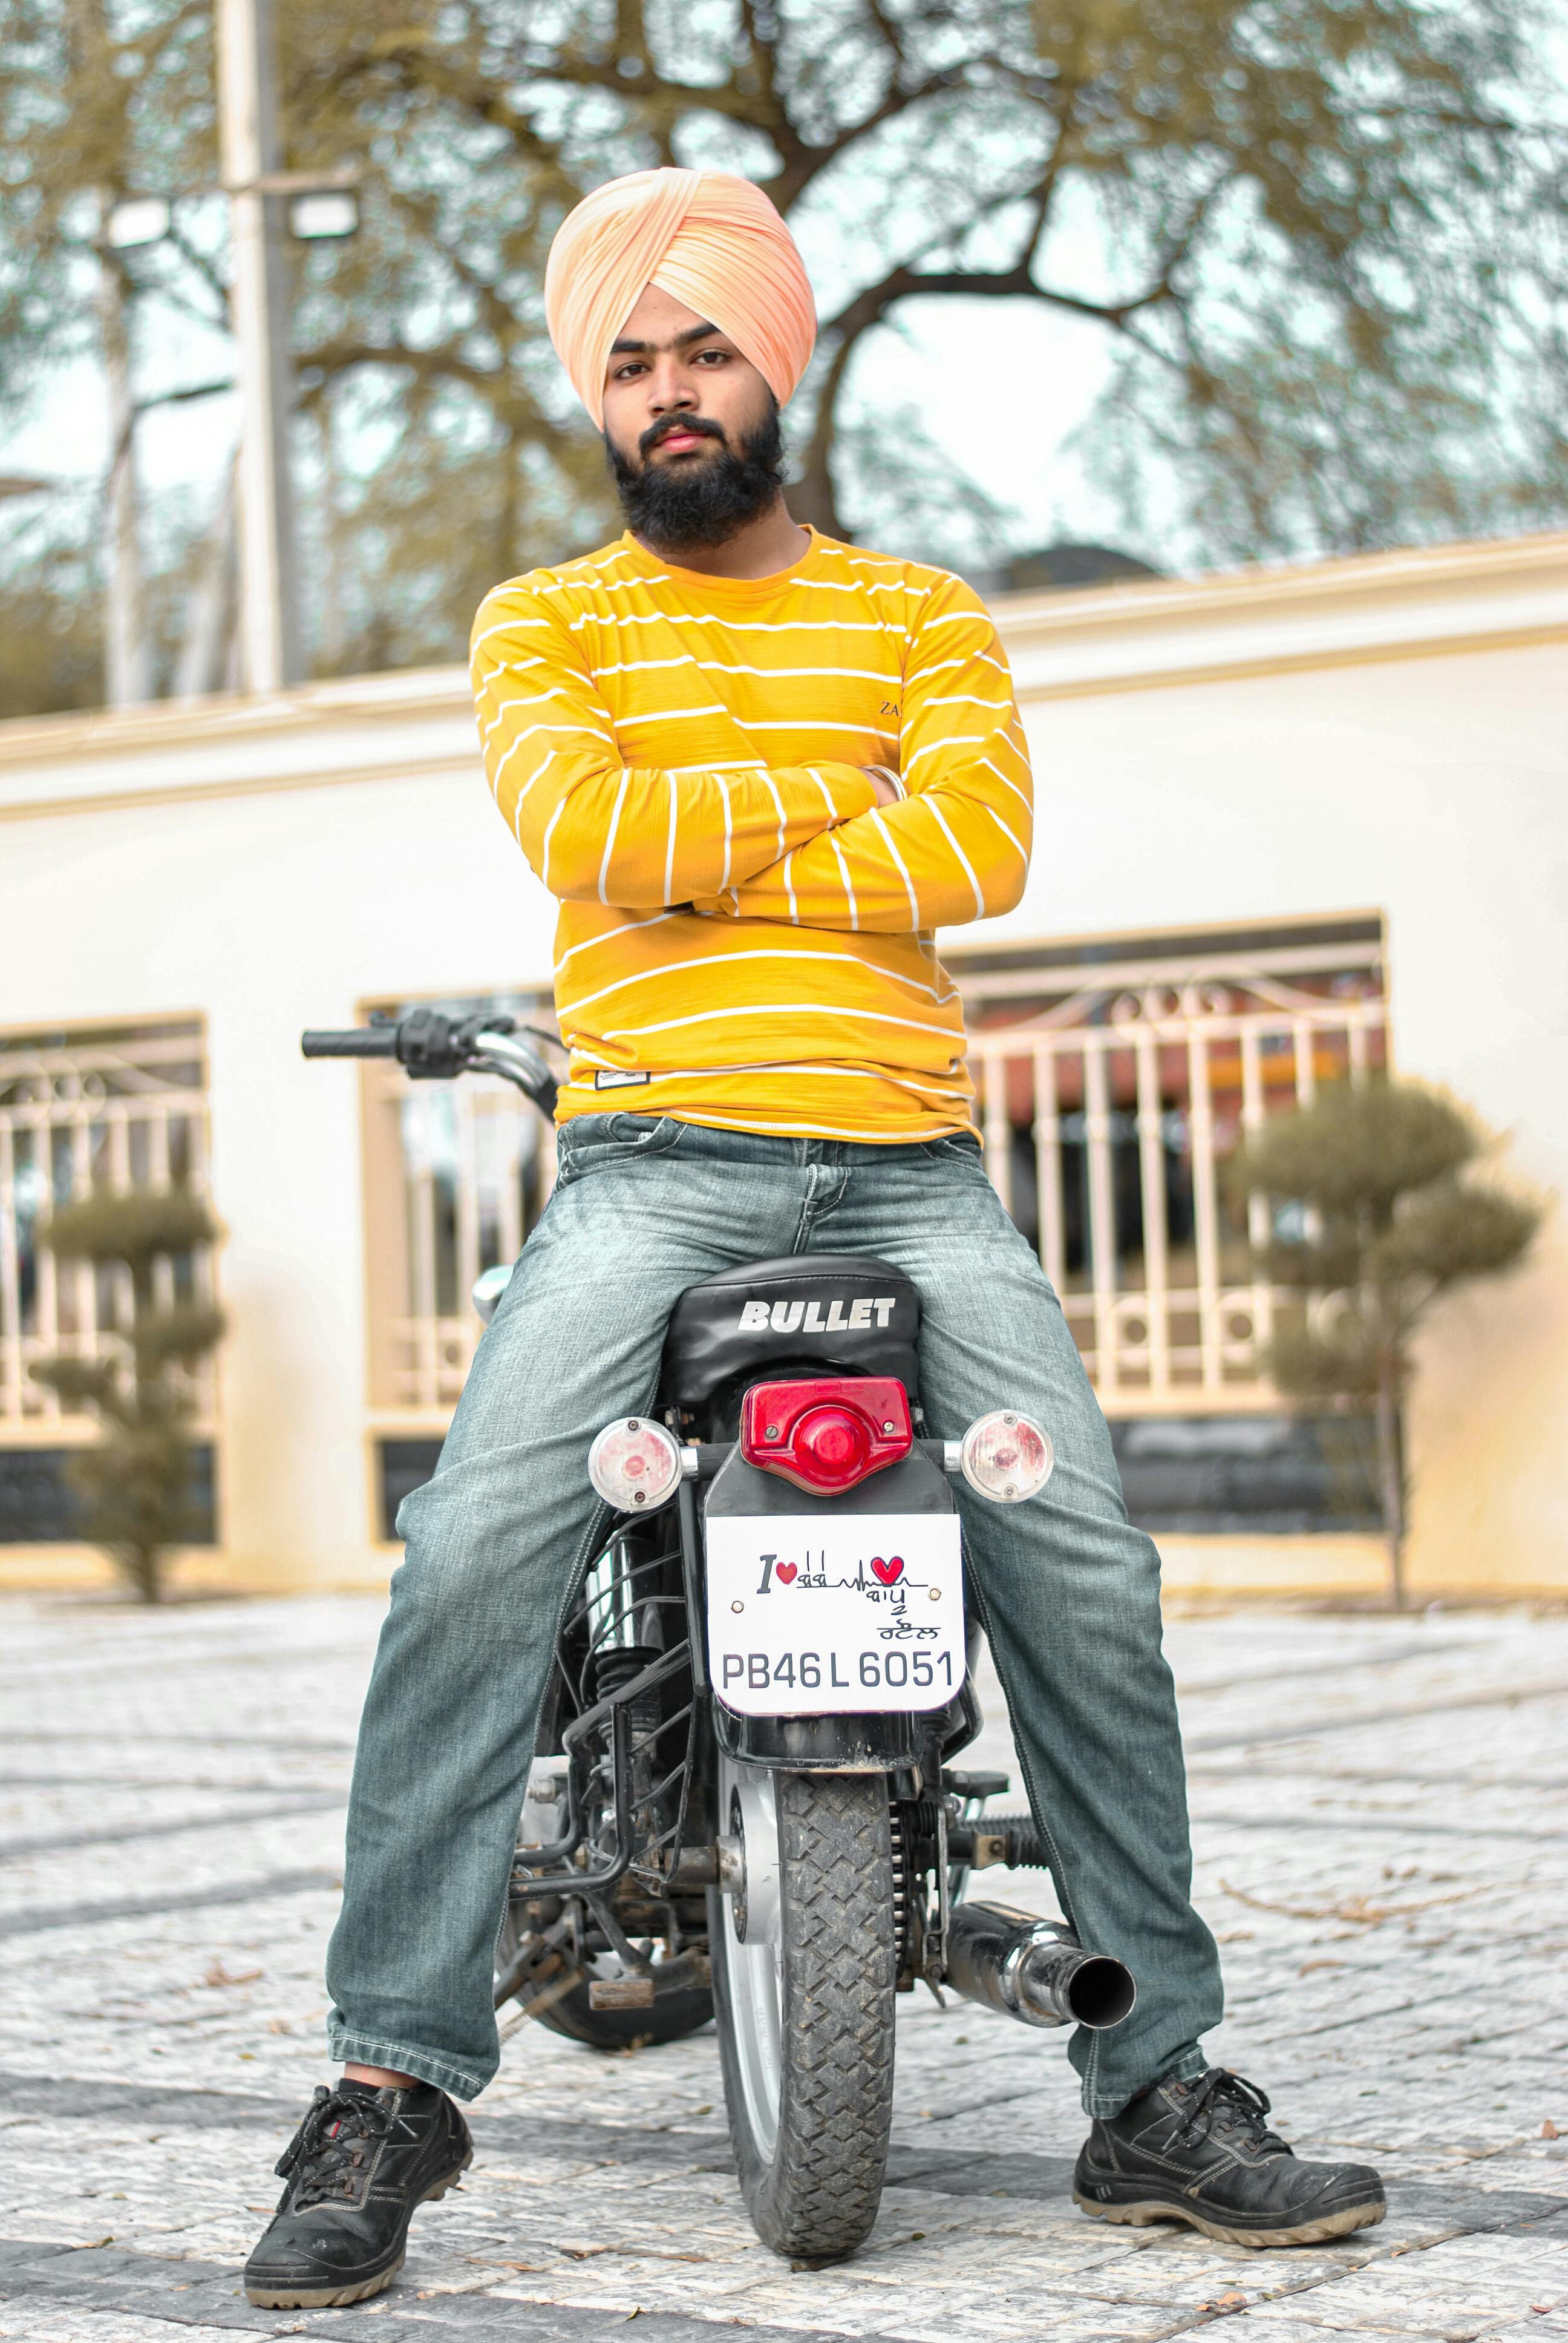 Atull Music - Boys ride toys, Men ride ENFIELD. ! ❤️ @atulgiriofficial  #inshort #jump #enfield #poses #pictureoftheday #follow #likeforfollow  #model #loveyourself #a #art #royalenfield #bullet #bike #ride #karma  #lightroom #presets ...